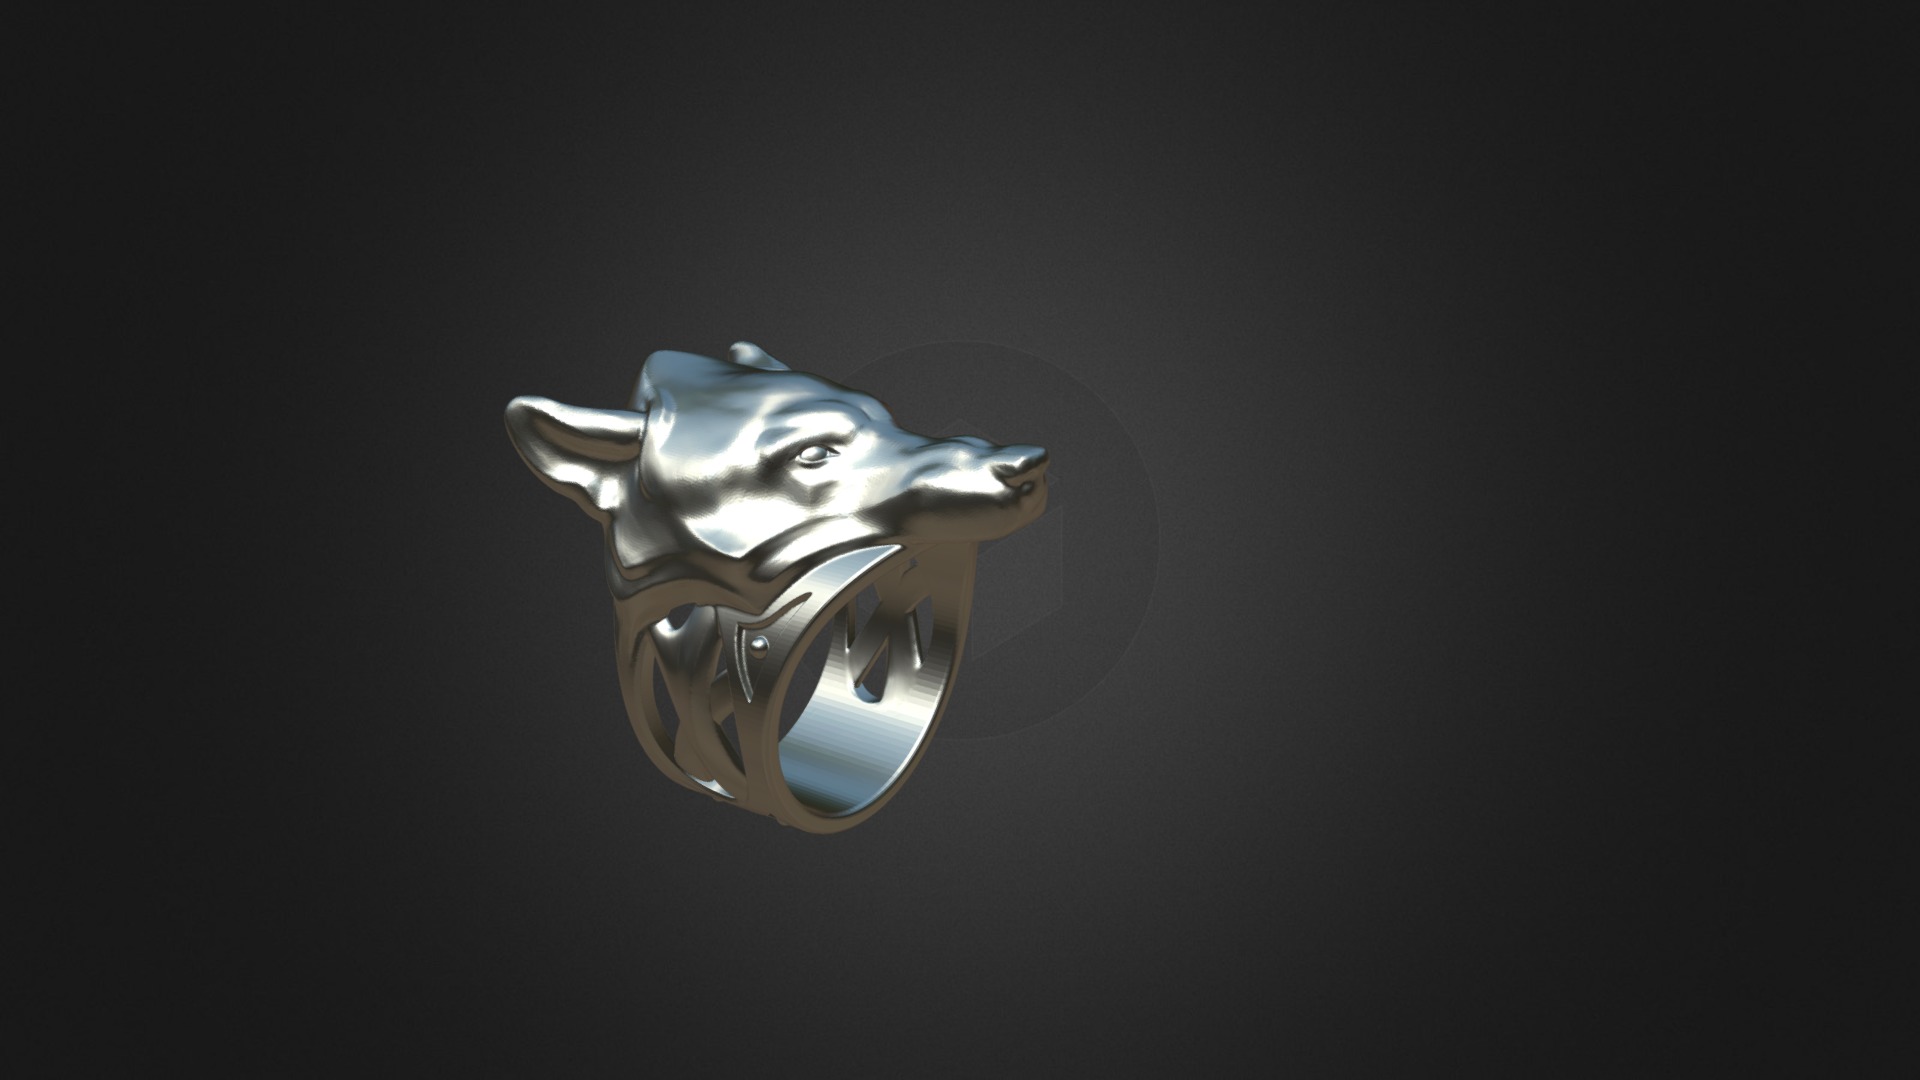 3D model wolf ring - This is a 3D model of the wolf ring. The 3D model is about a silver and blue fish.